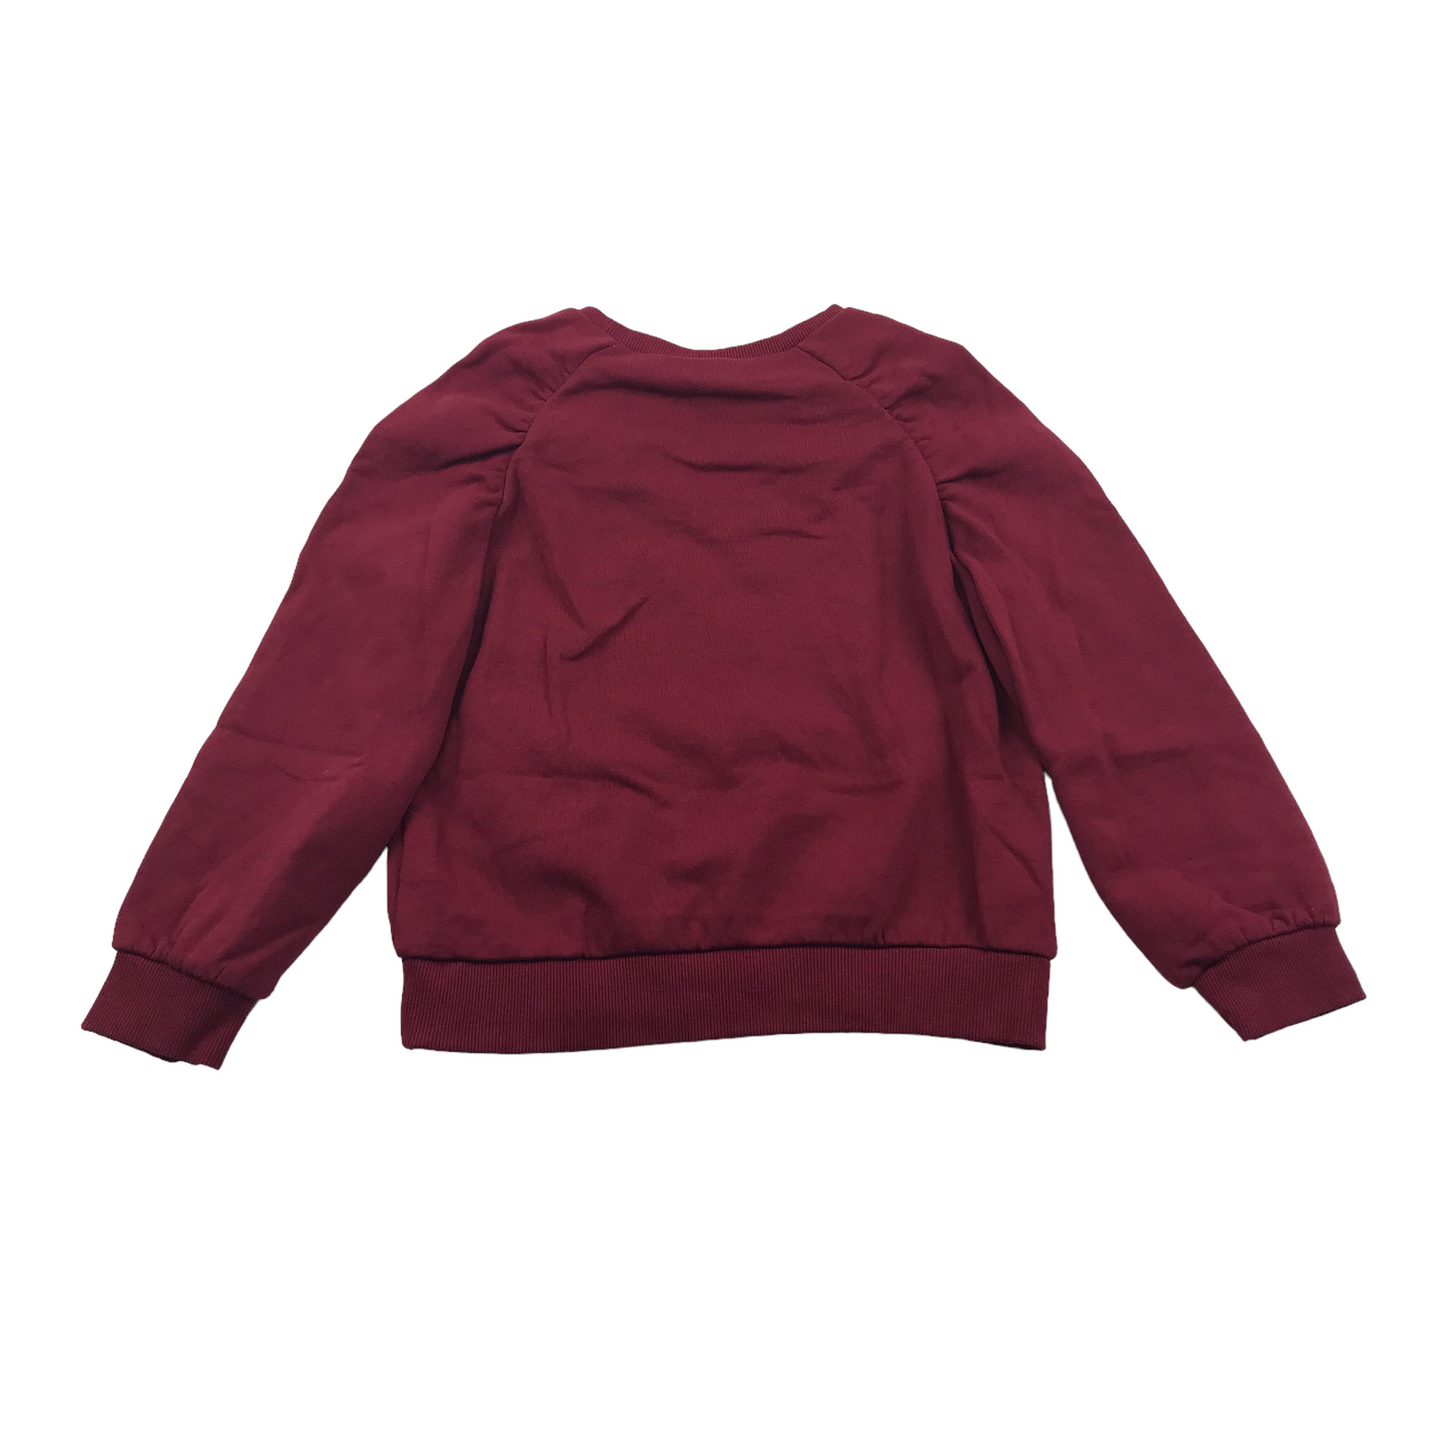 Tao Burgundy Floral Embroidery Sweater Jumper Age 10